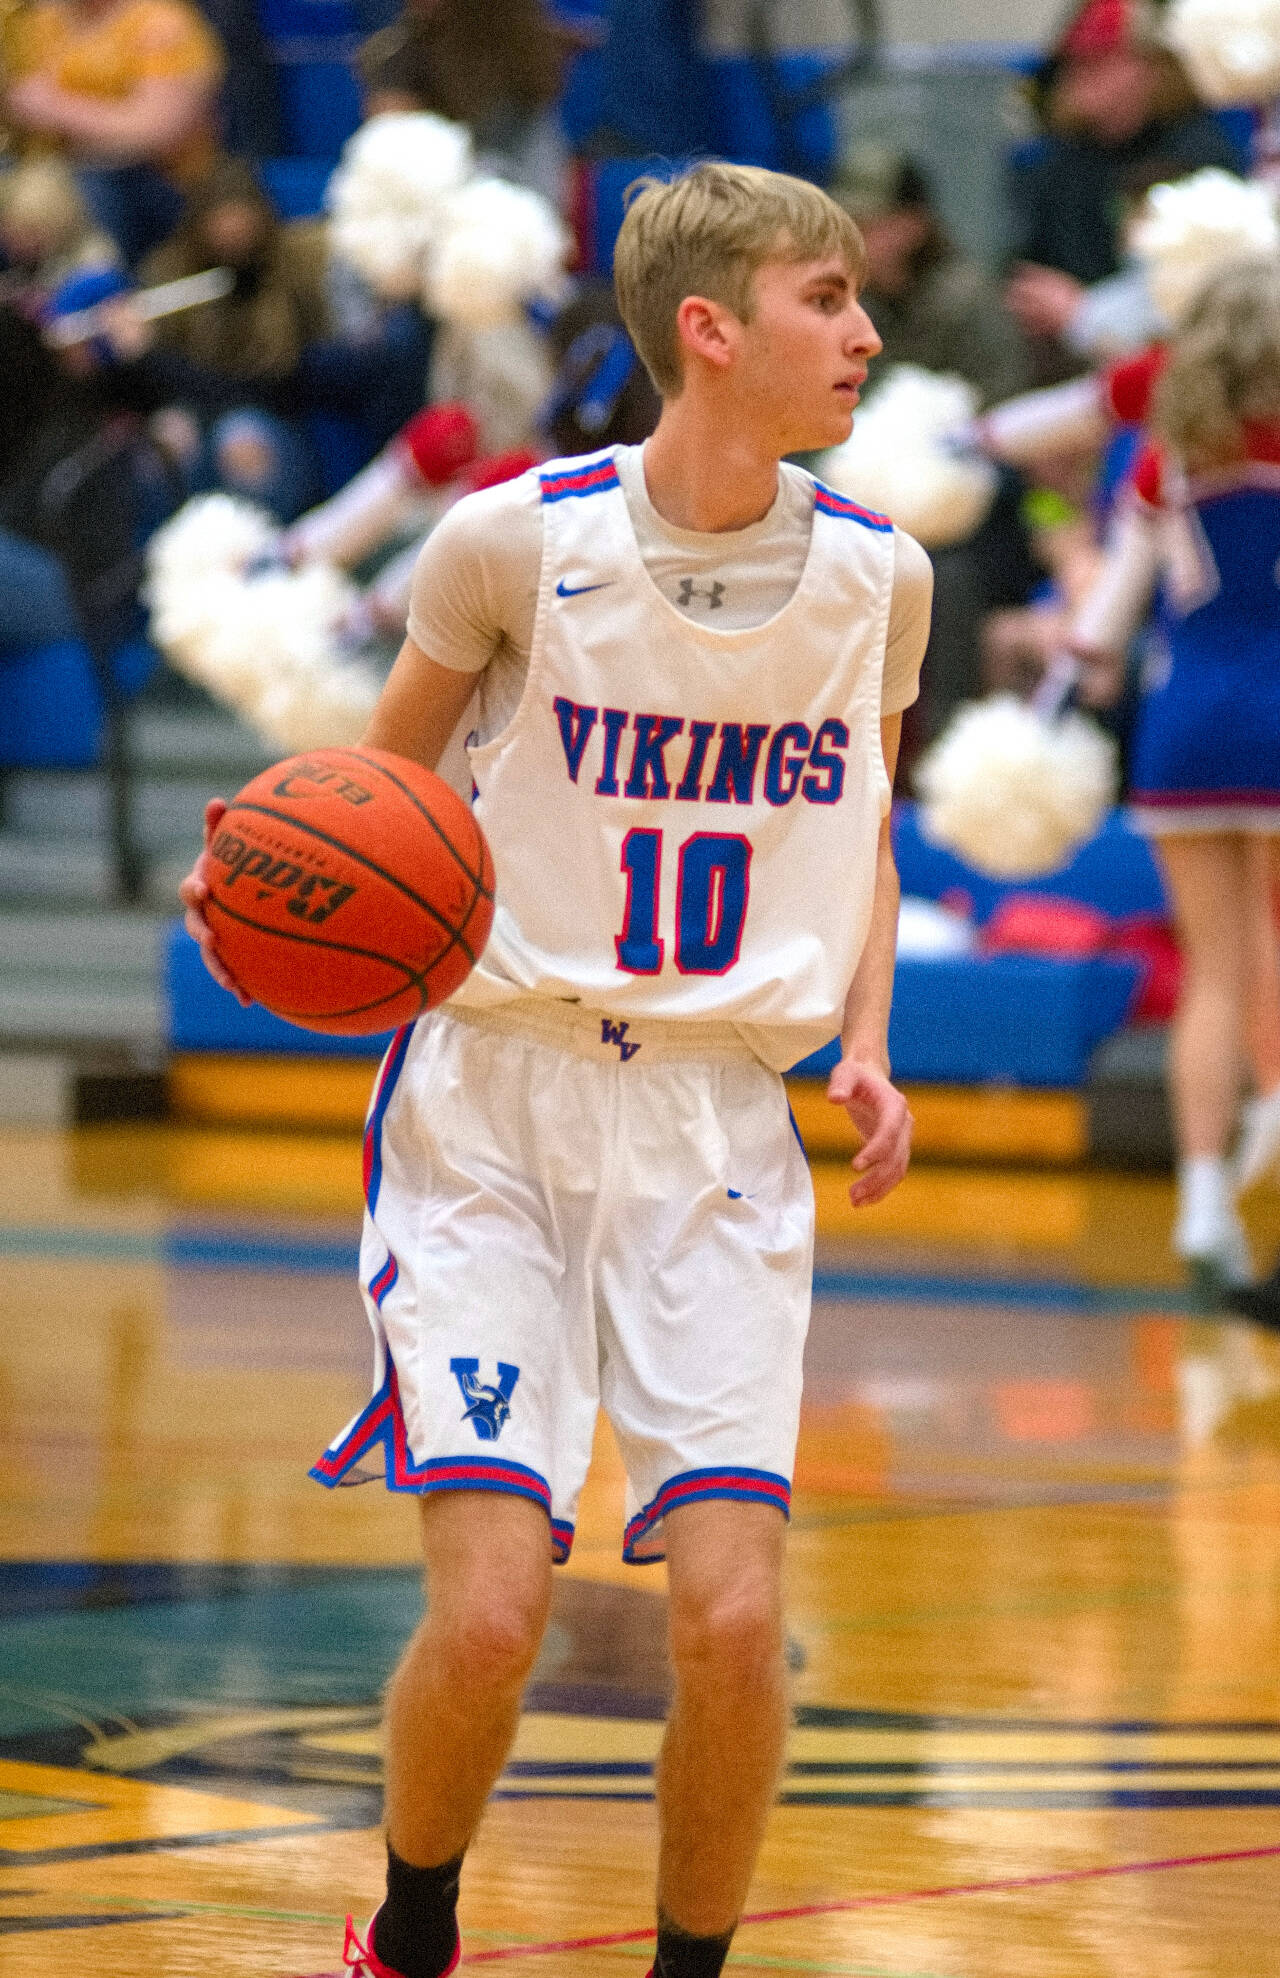 DAILY WORLD FILE PHOTO Willapa Valley’s Riley Pearson was named to the 1B Columbia Valley League’s First Team after leading the Vikings with 12.3 points per game this season.